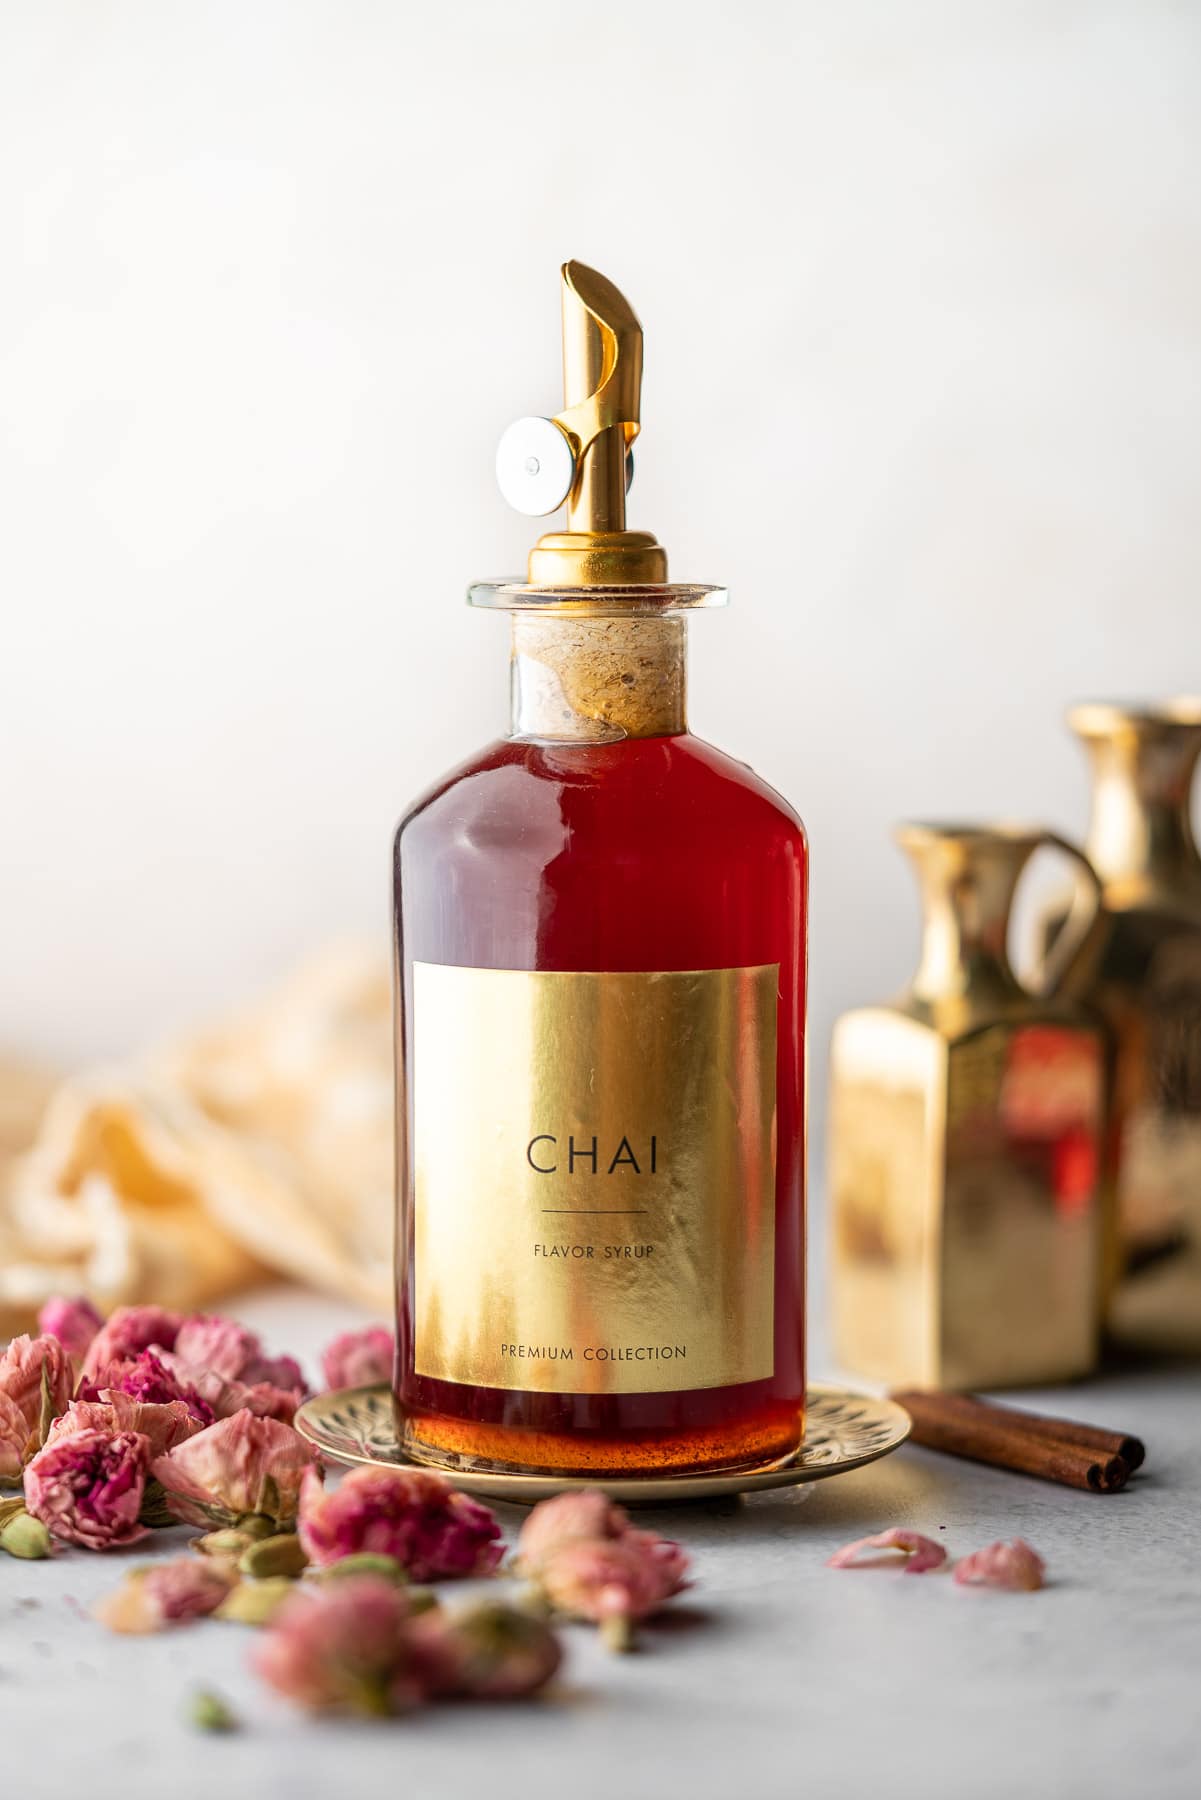 syrup bottle filled with chai syrup with a label decorated with roses and cardamom